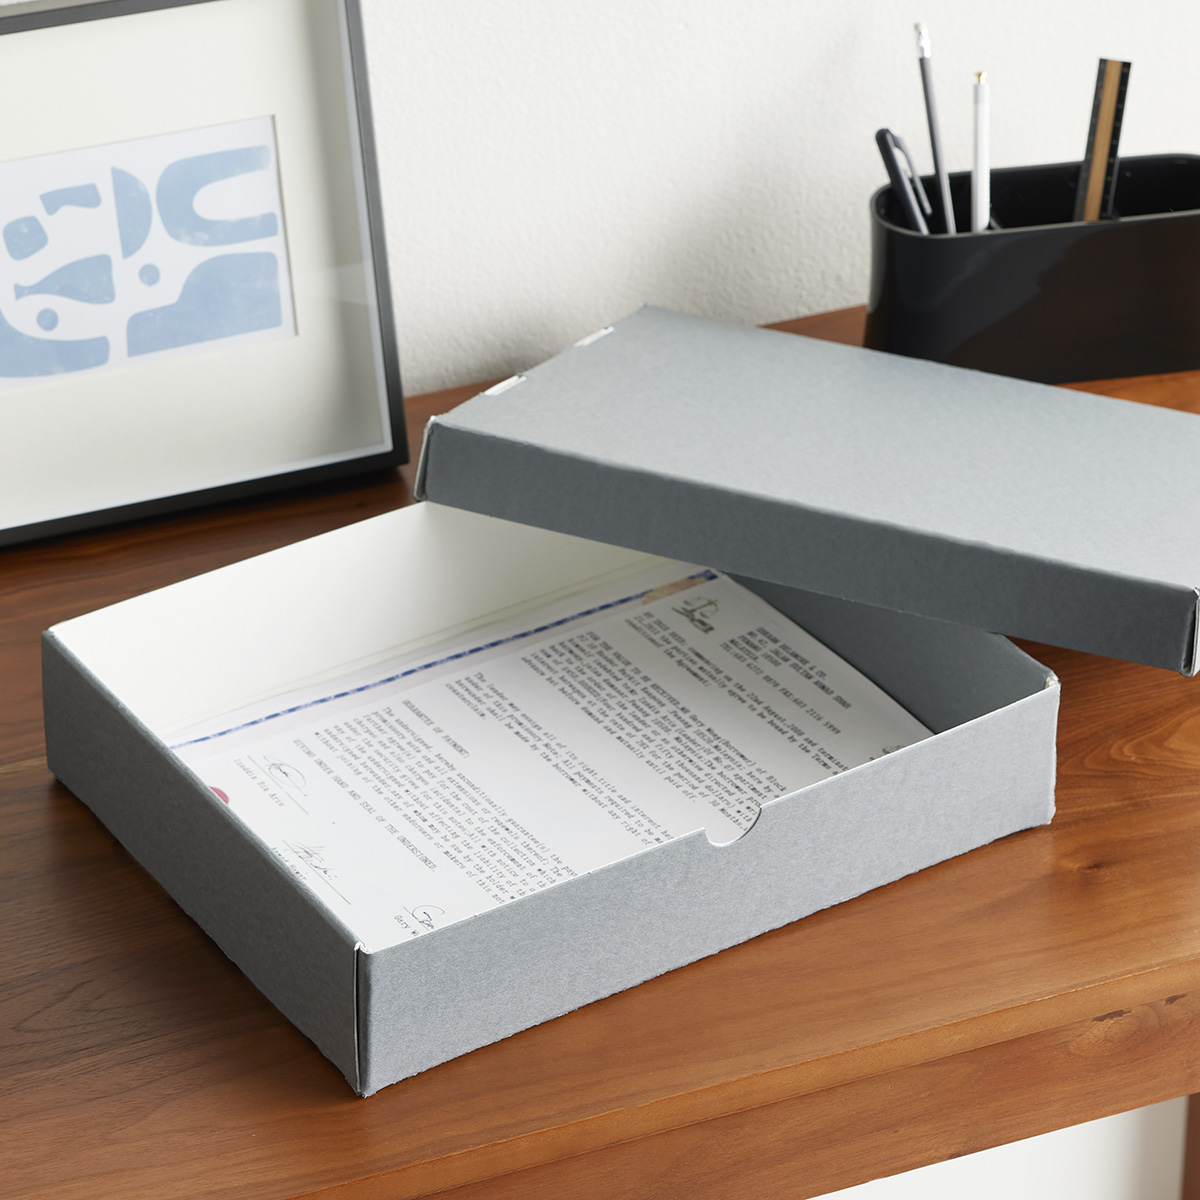 University Products Archival Document Storage Boxes | The Container Store